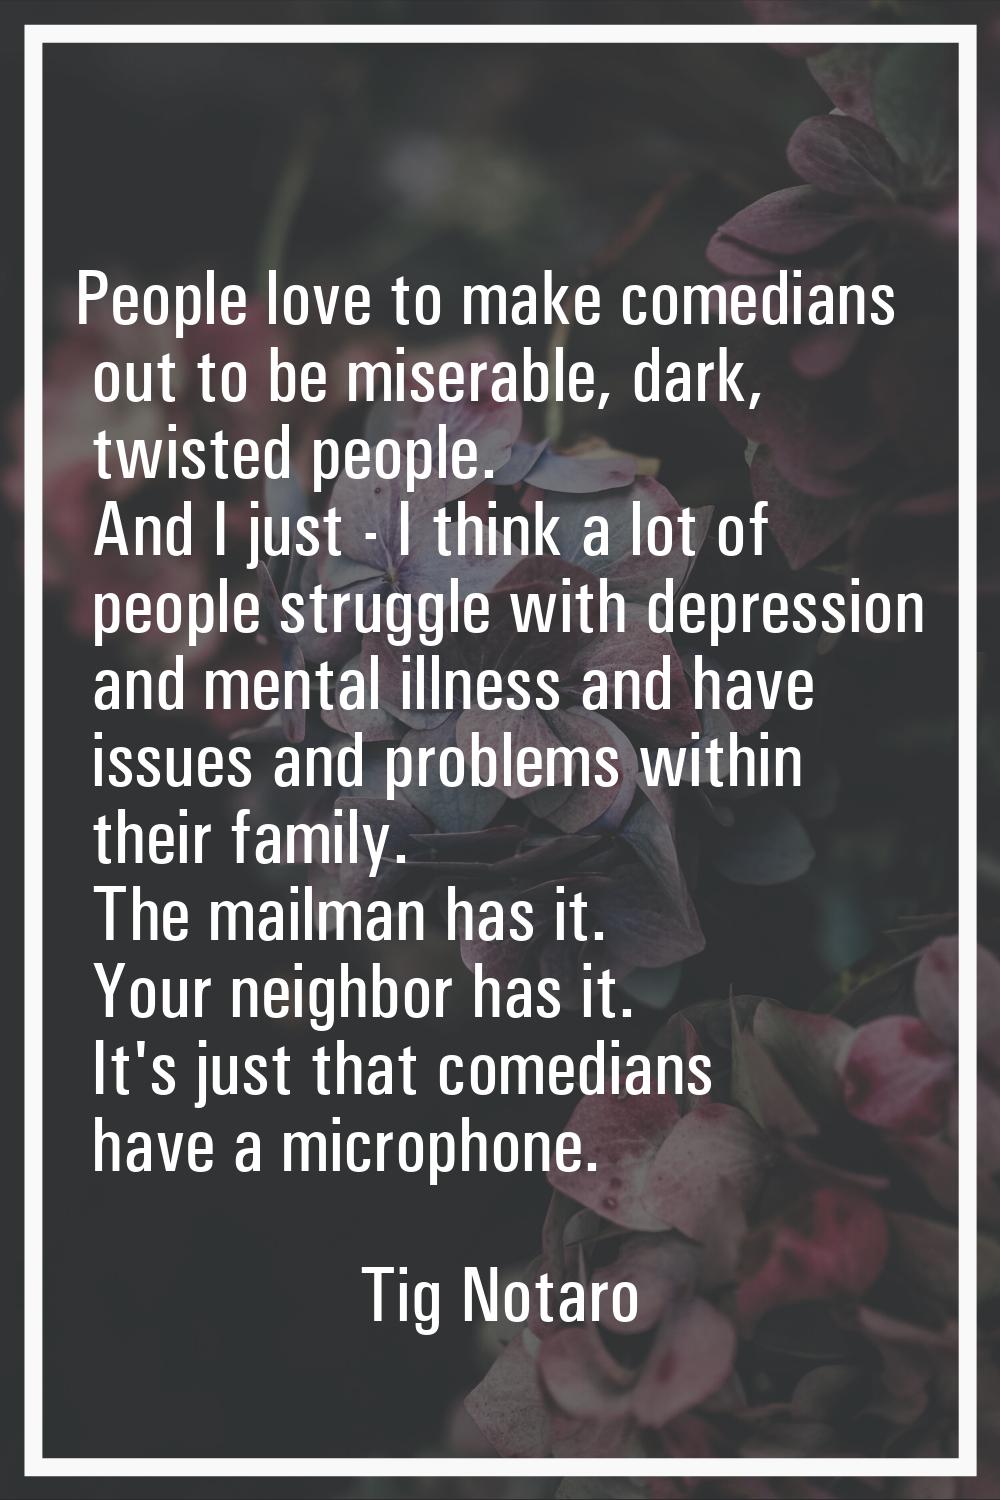 People love to make comedians out to be miserable, dark, twisted people. And I just - I think a lot